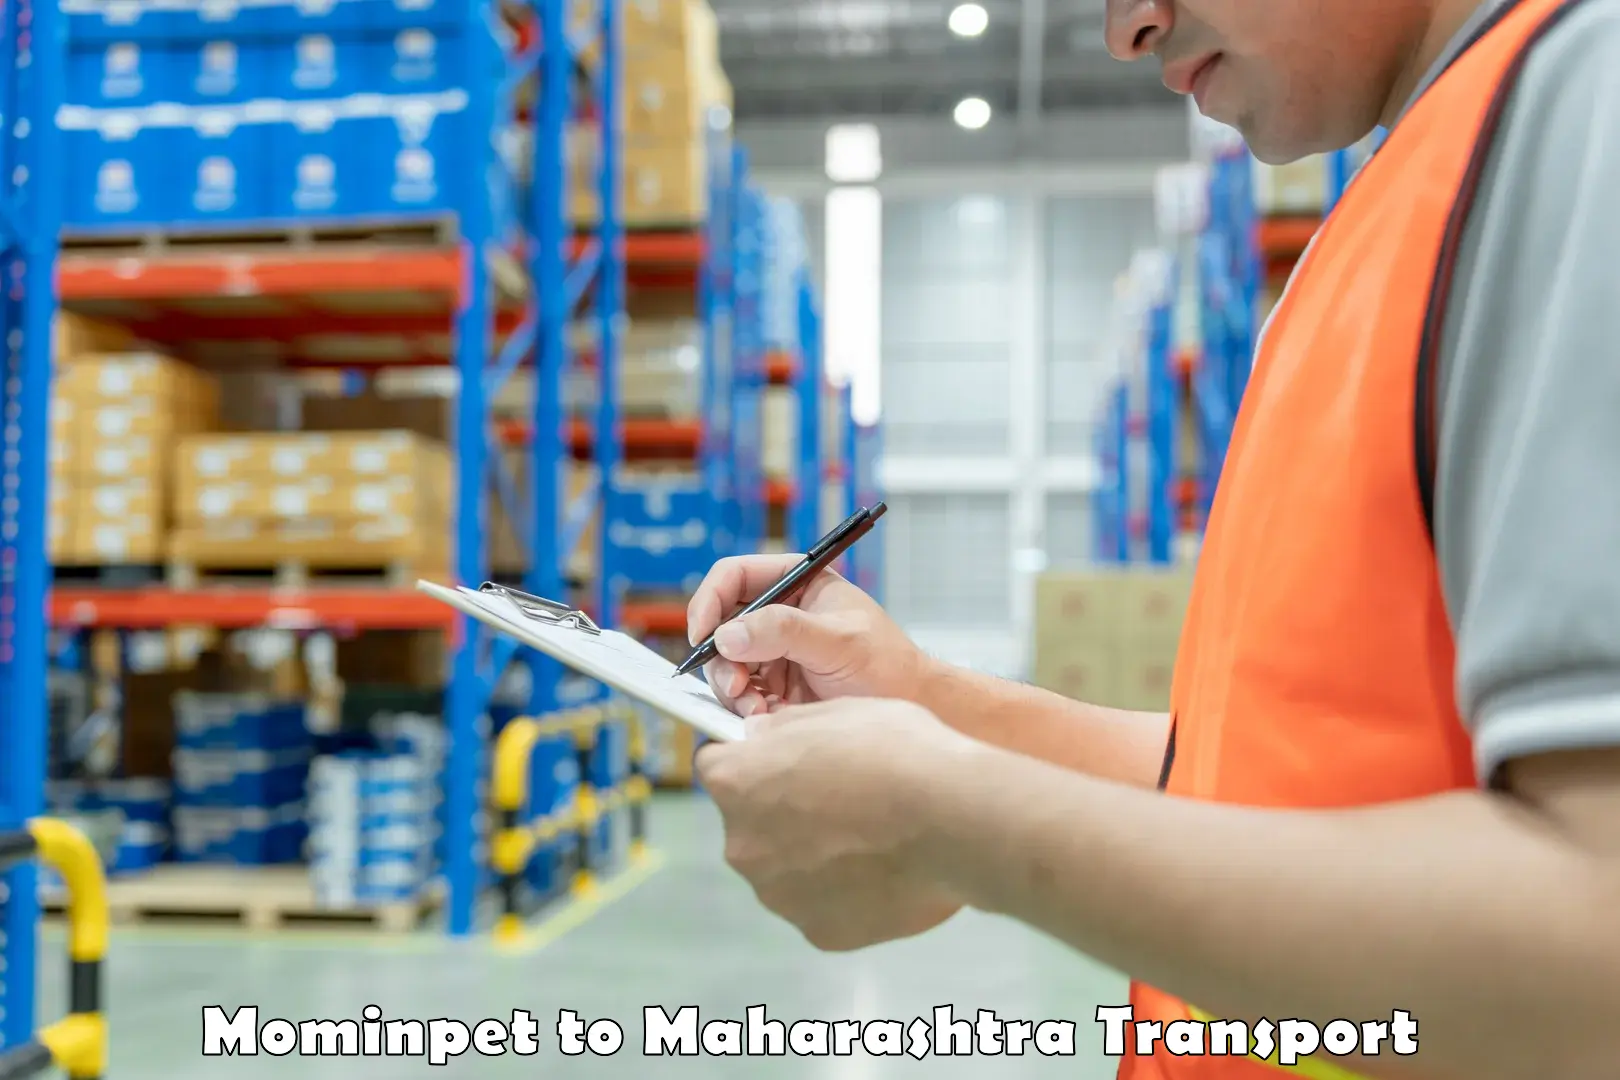 Container transport service Mominpet to Sindhudurg